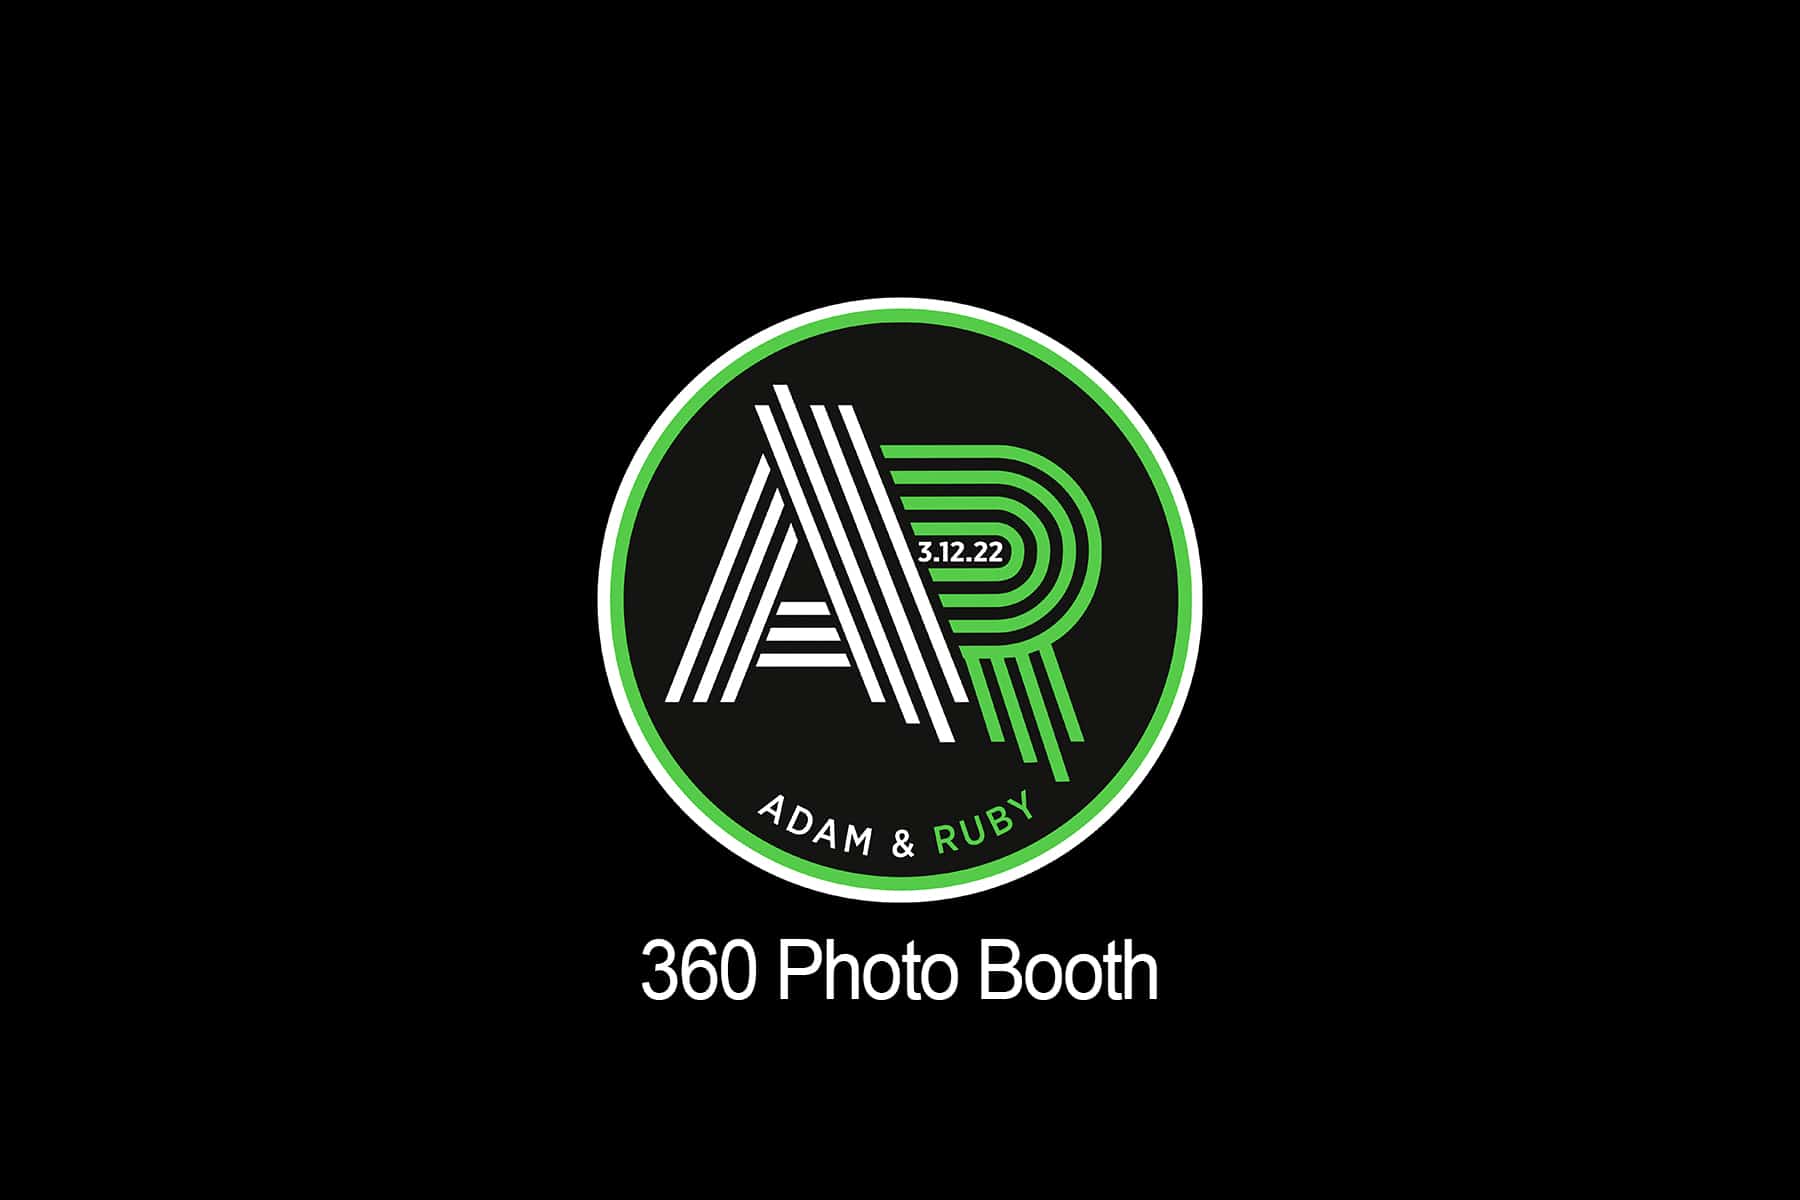 360 booth videos